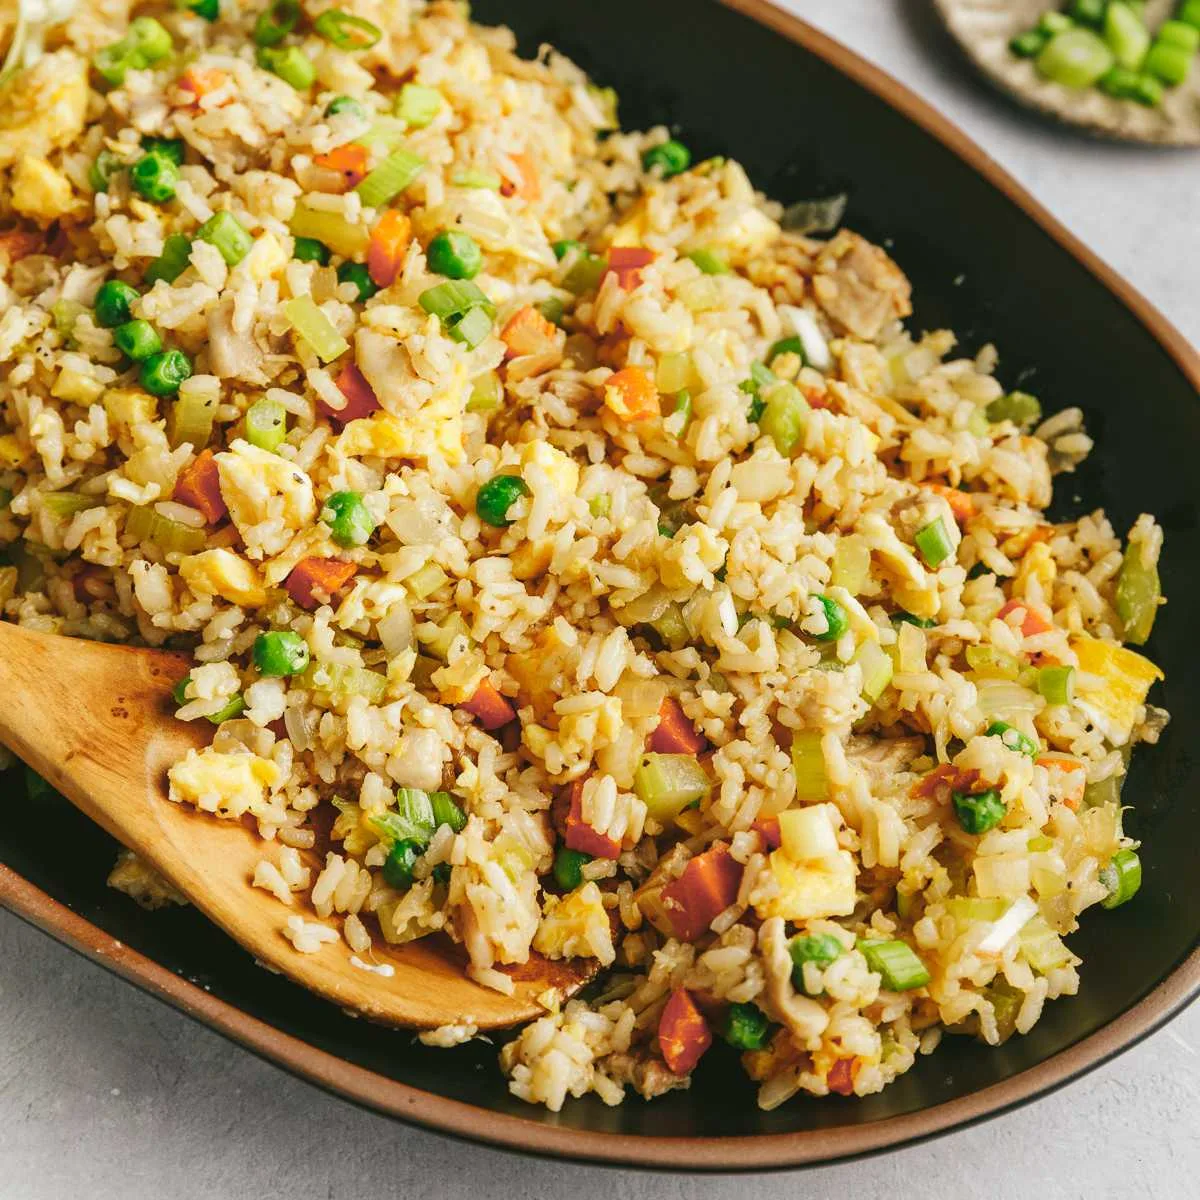 A bowl of chicken fried rice next to some chopped scallions.